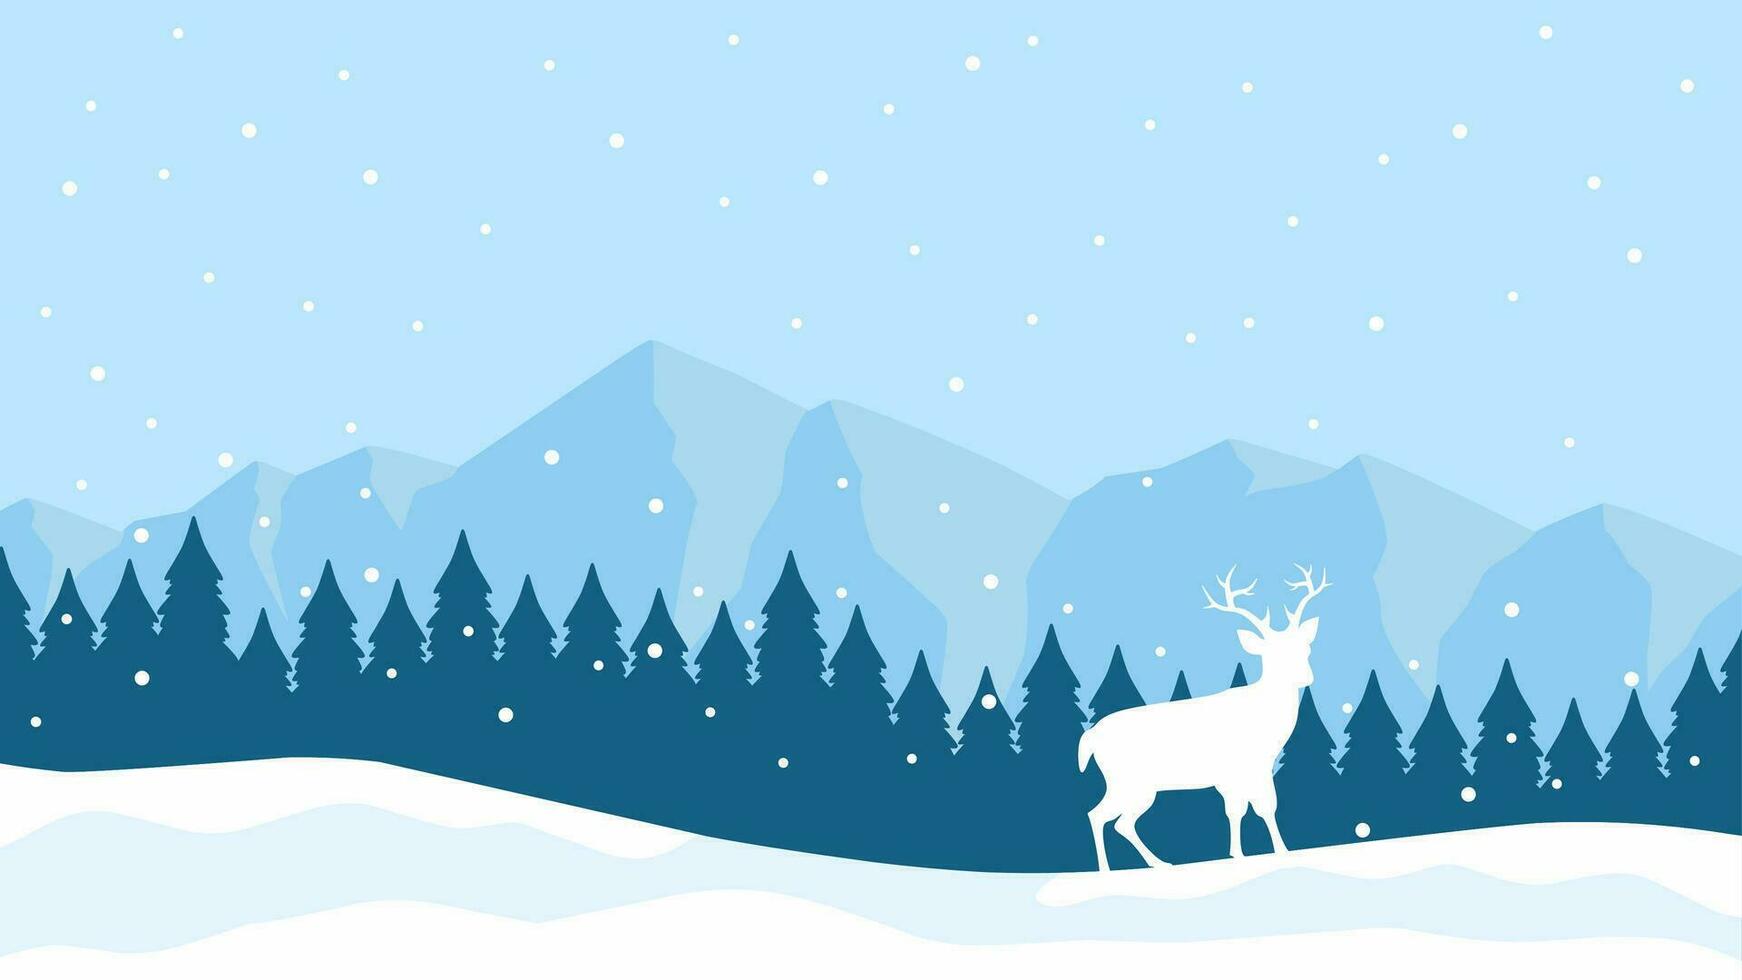 Winter landscape vector illustration. Winter silhouette with deer and pine forest at the snow hill. Cold season landscape for illustration, background or wallpaper